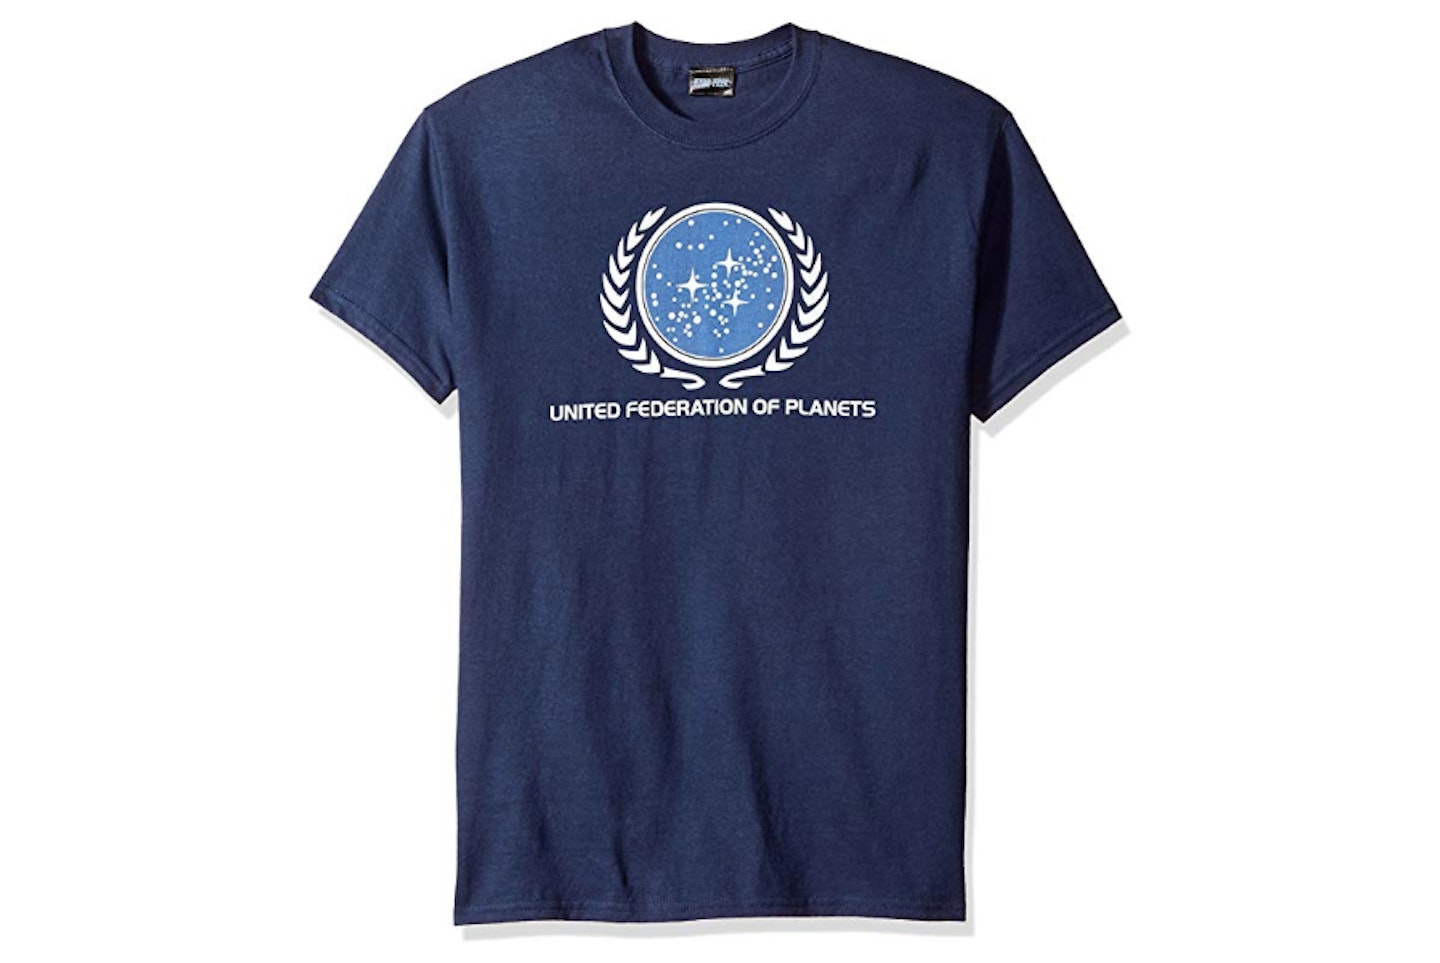 Star Trek - St / United Federation Logo Adult T-Shirt In Navy, from £20.95